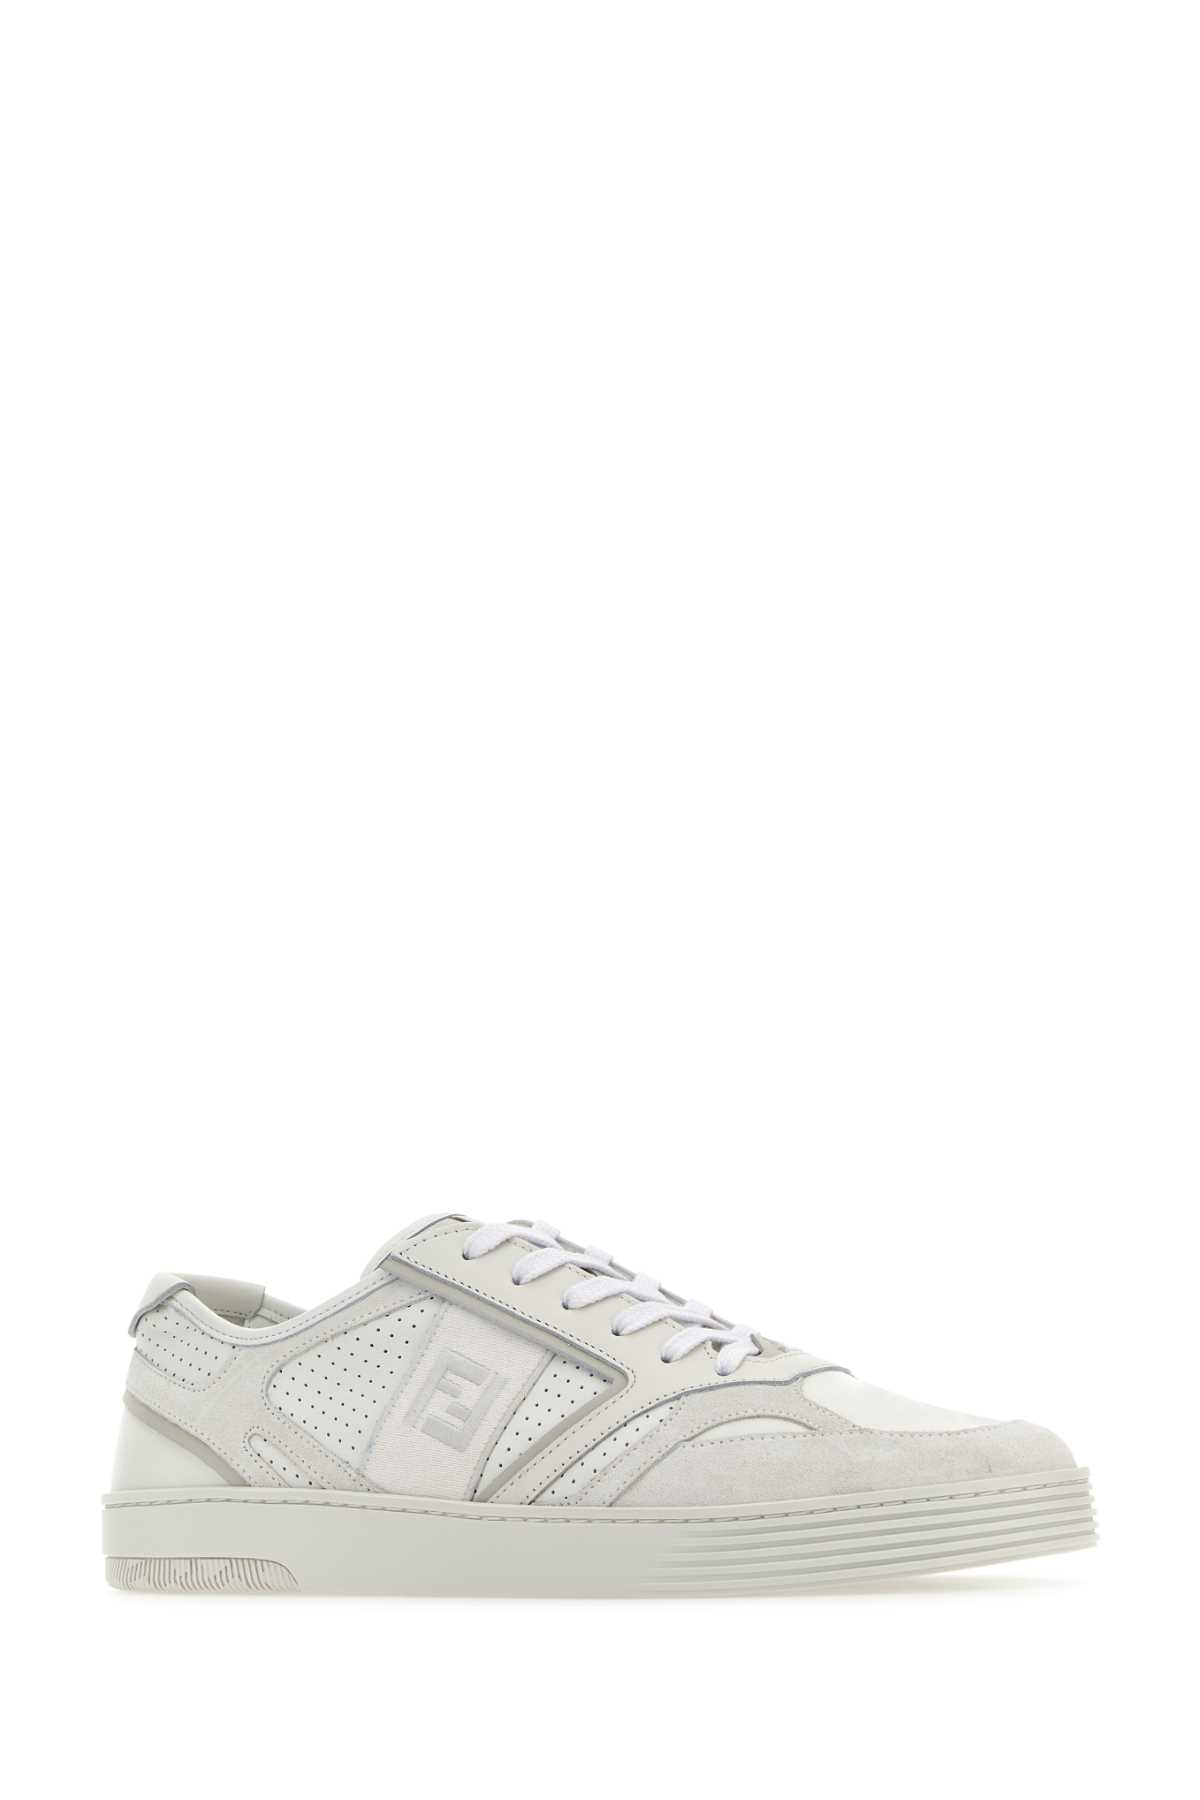 FENDI WHITE LEATHER AND SUEDE STEP SNEAKERS